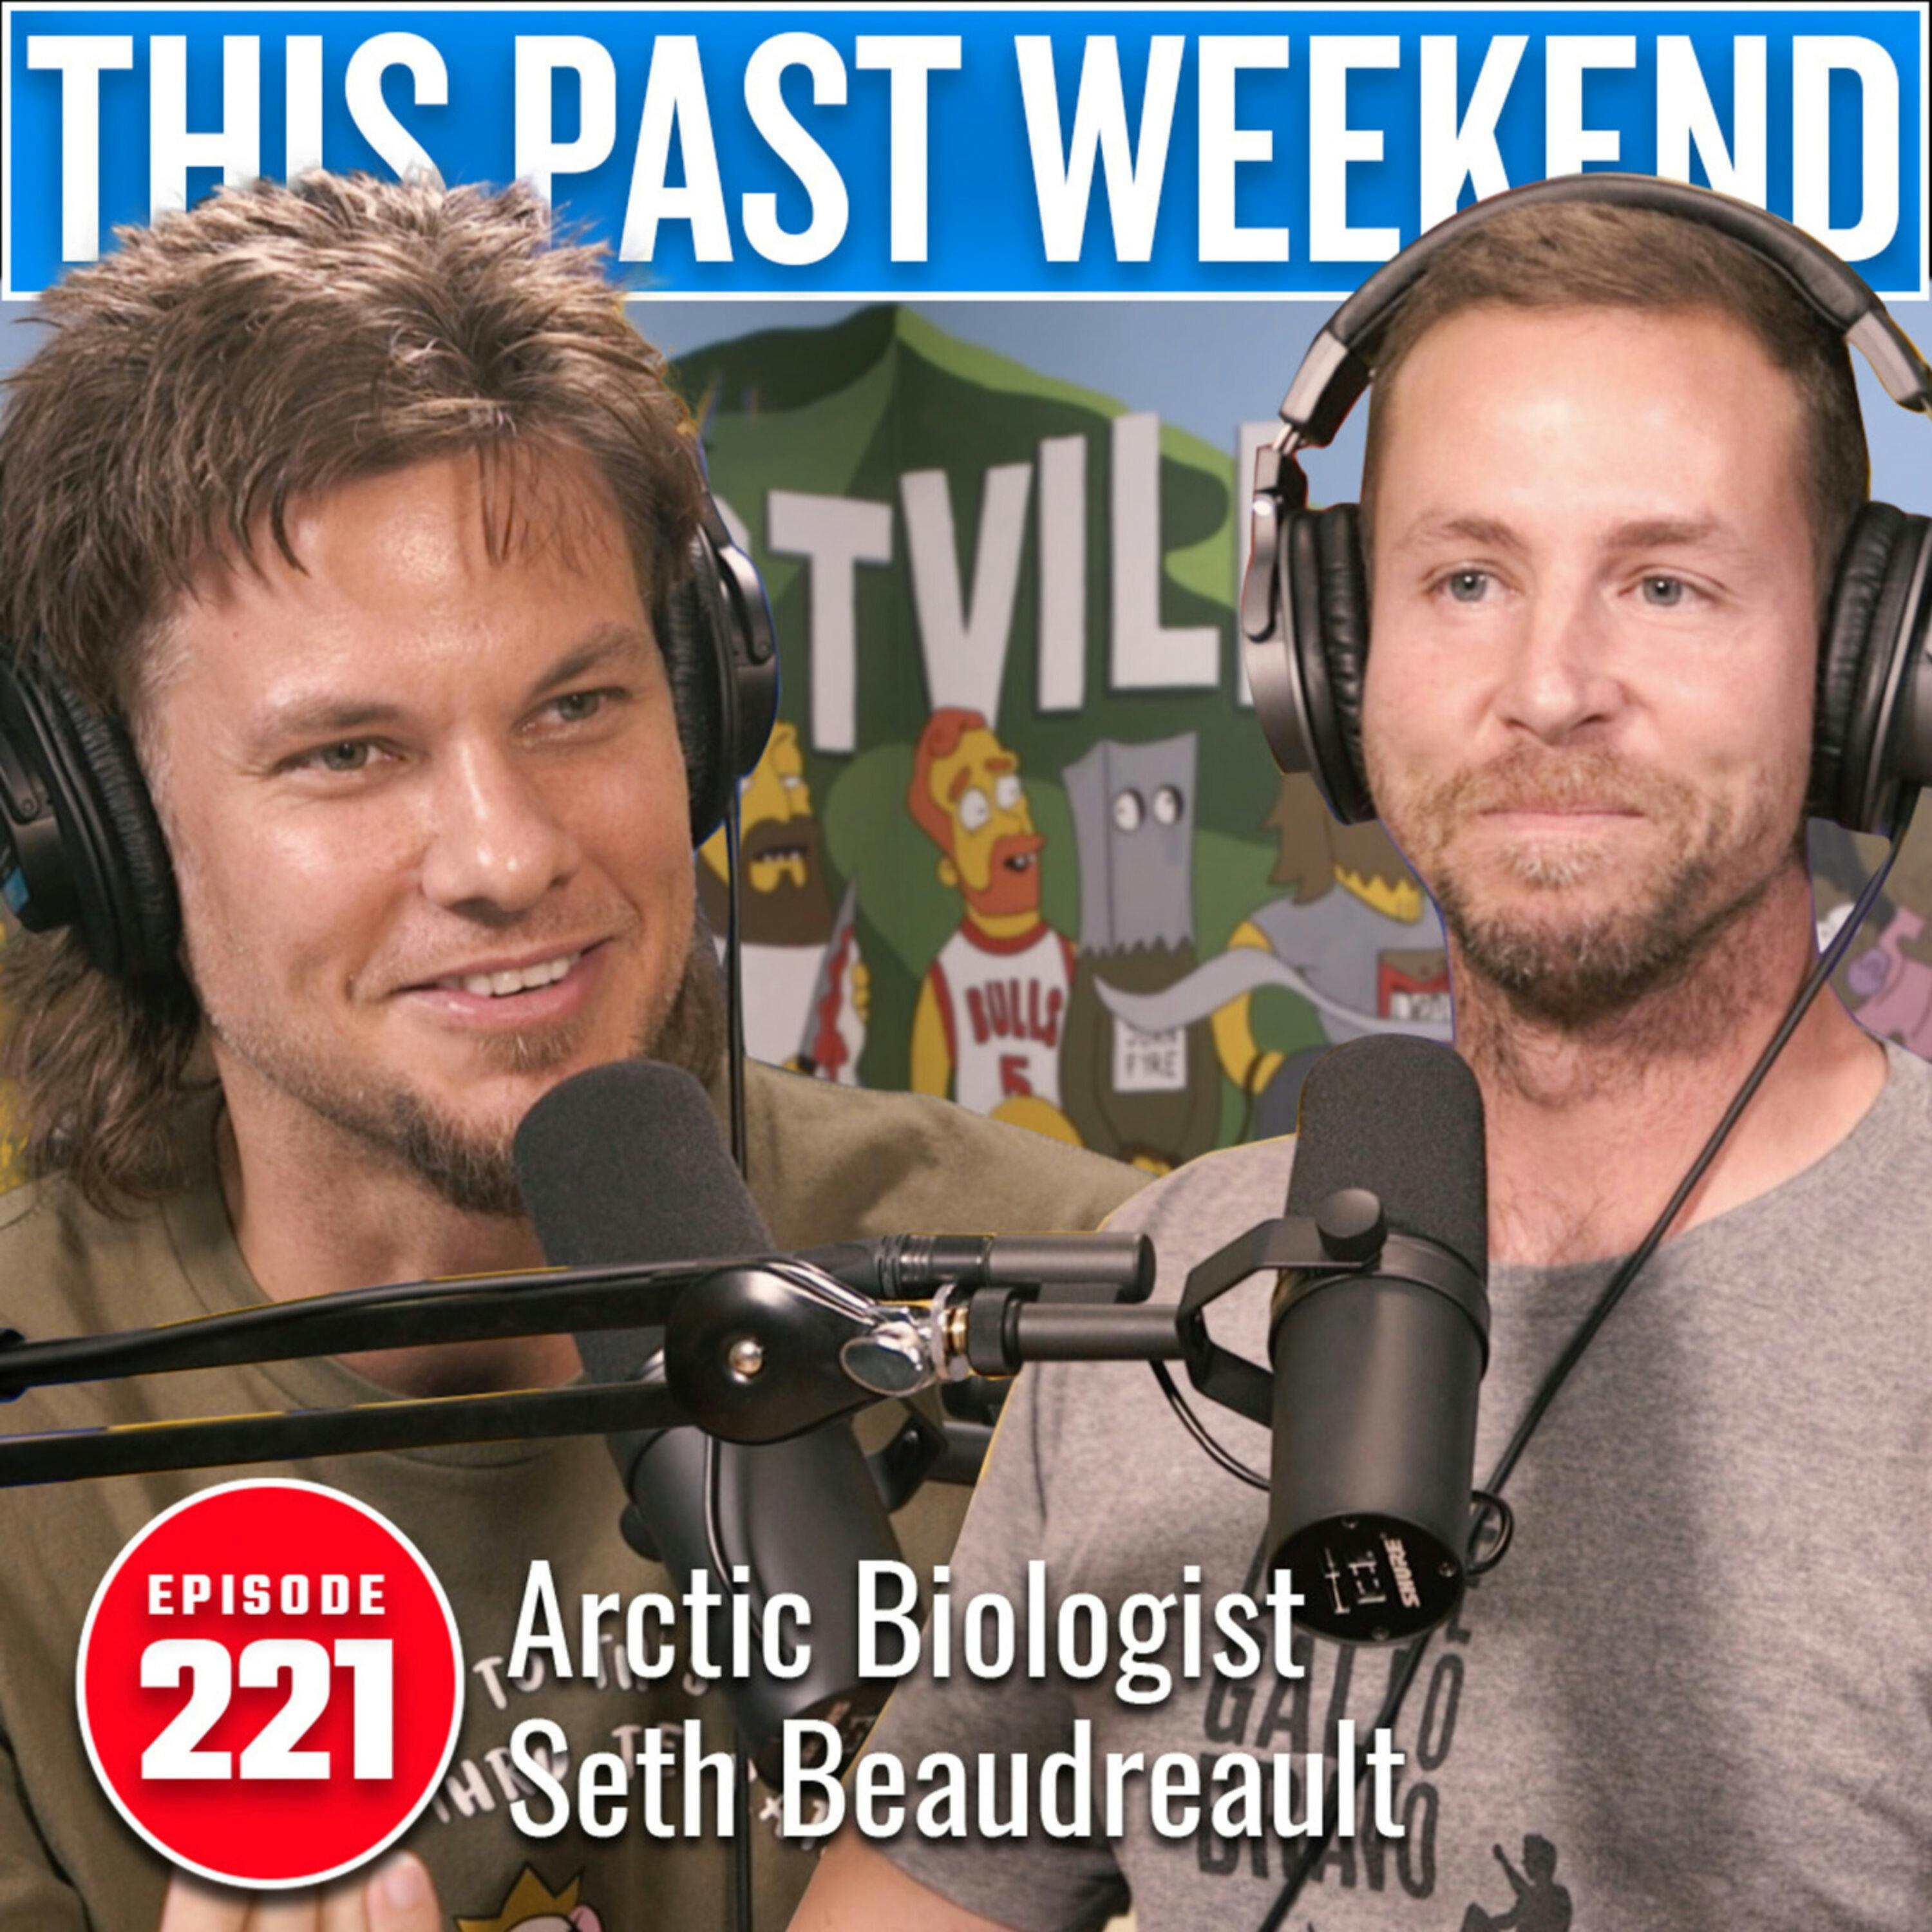 Arctic Biologist Seth Beaudreault | This Past Weekend #221 by Theo Von